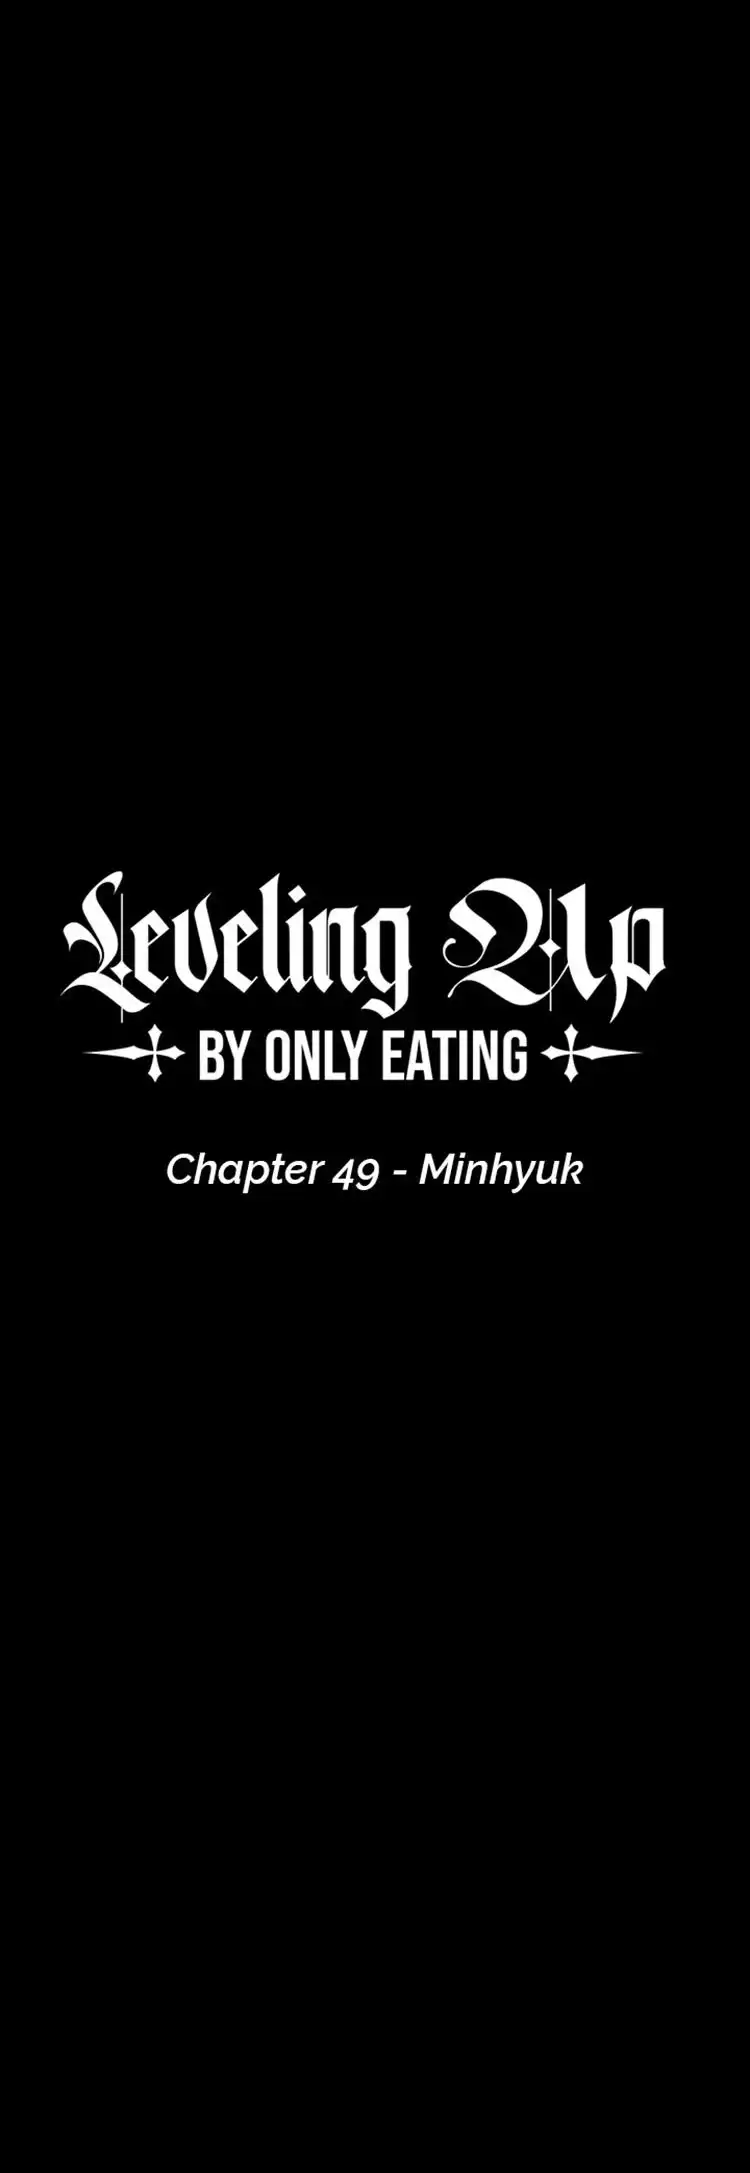 Leveling Up, By Only Eating! Chapter 49